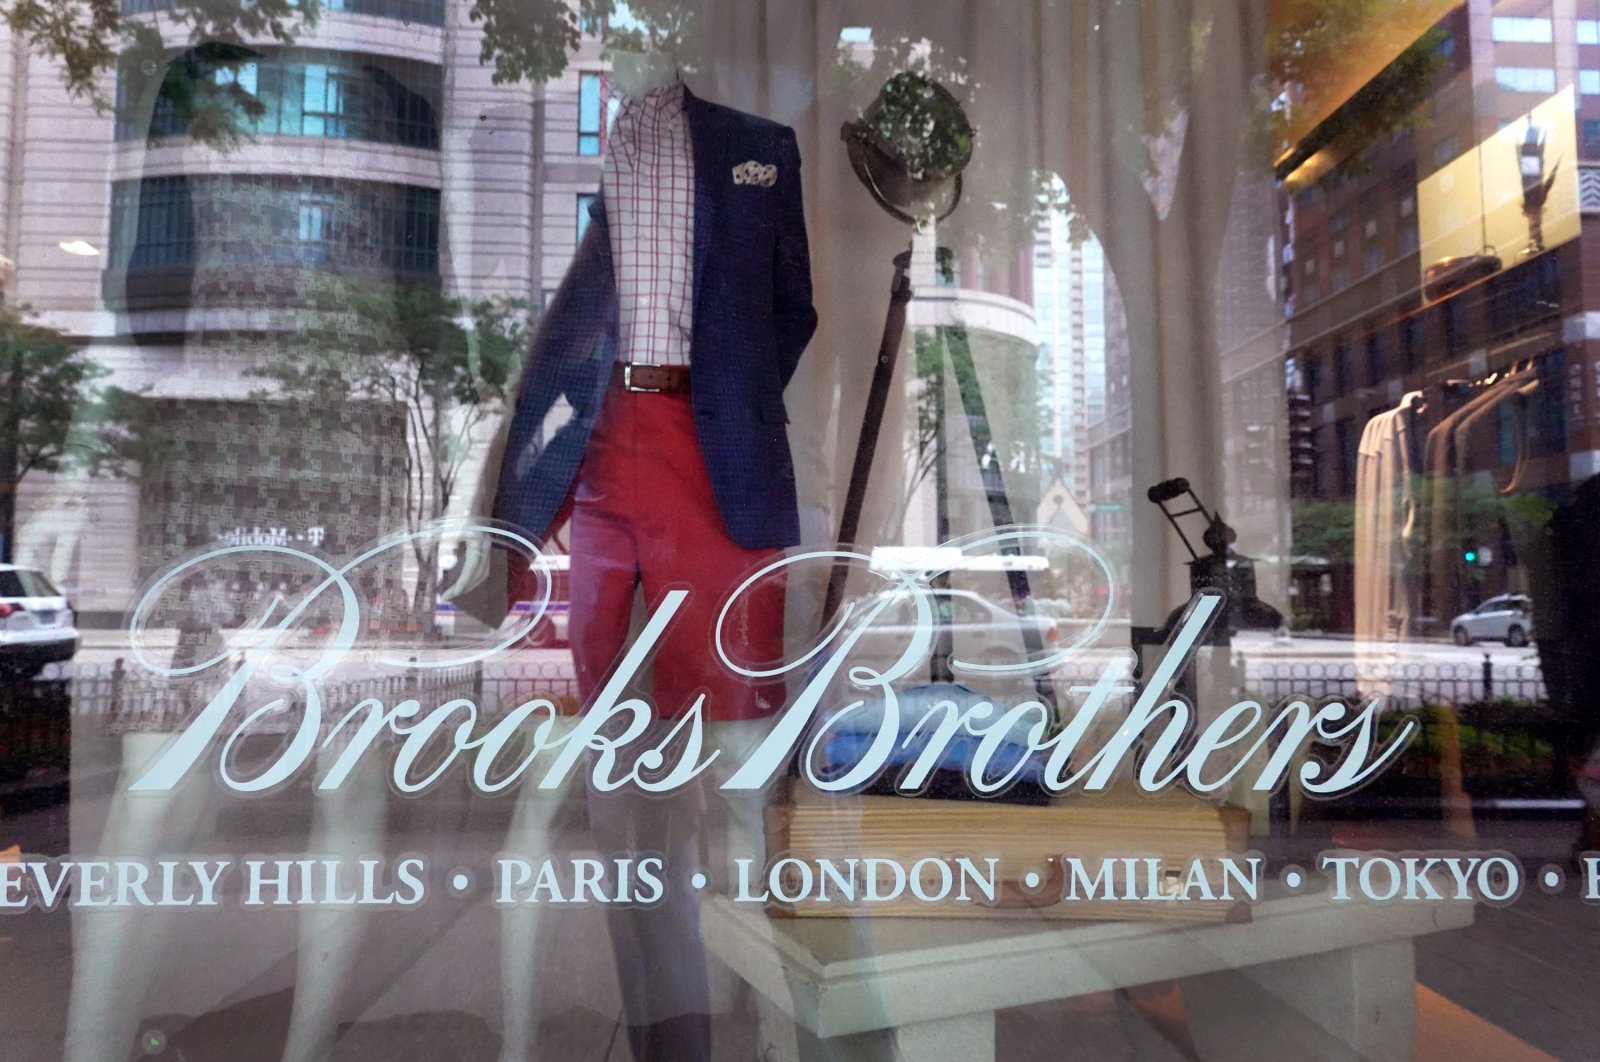 The Brooks Brothers logo is painted on the window of a store in closed along the Magnificent Mile in Chicago, Illinois, July 8, 2020. (AFP Photo)